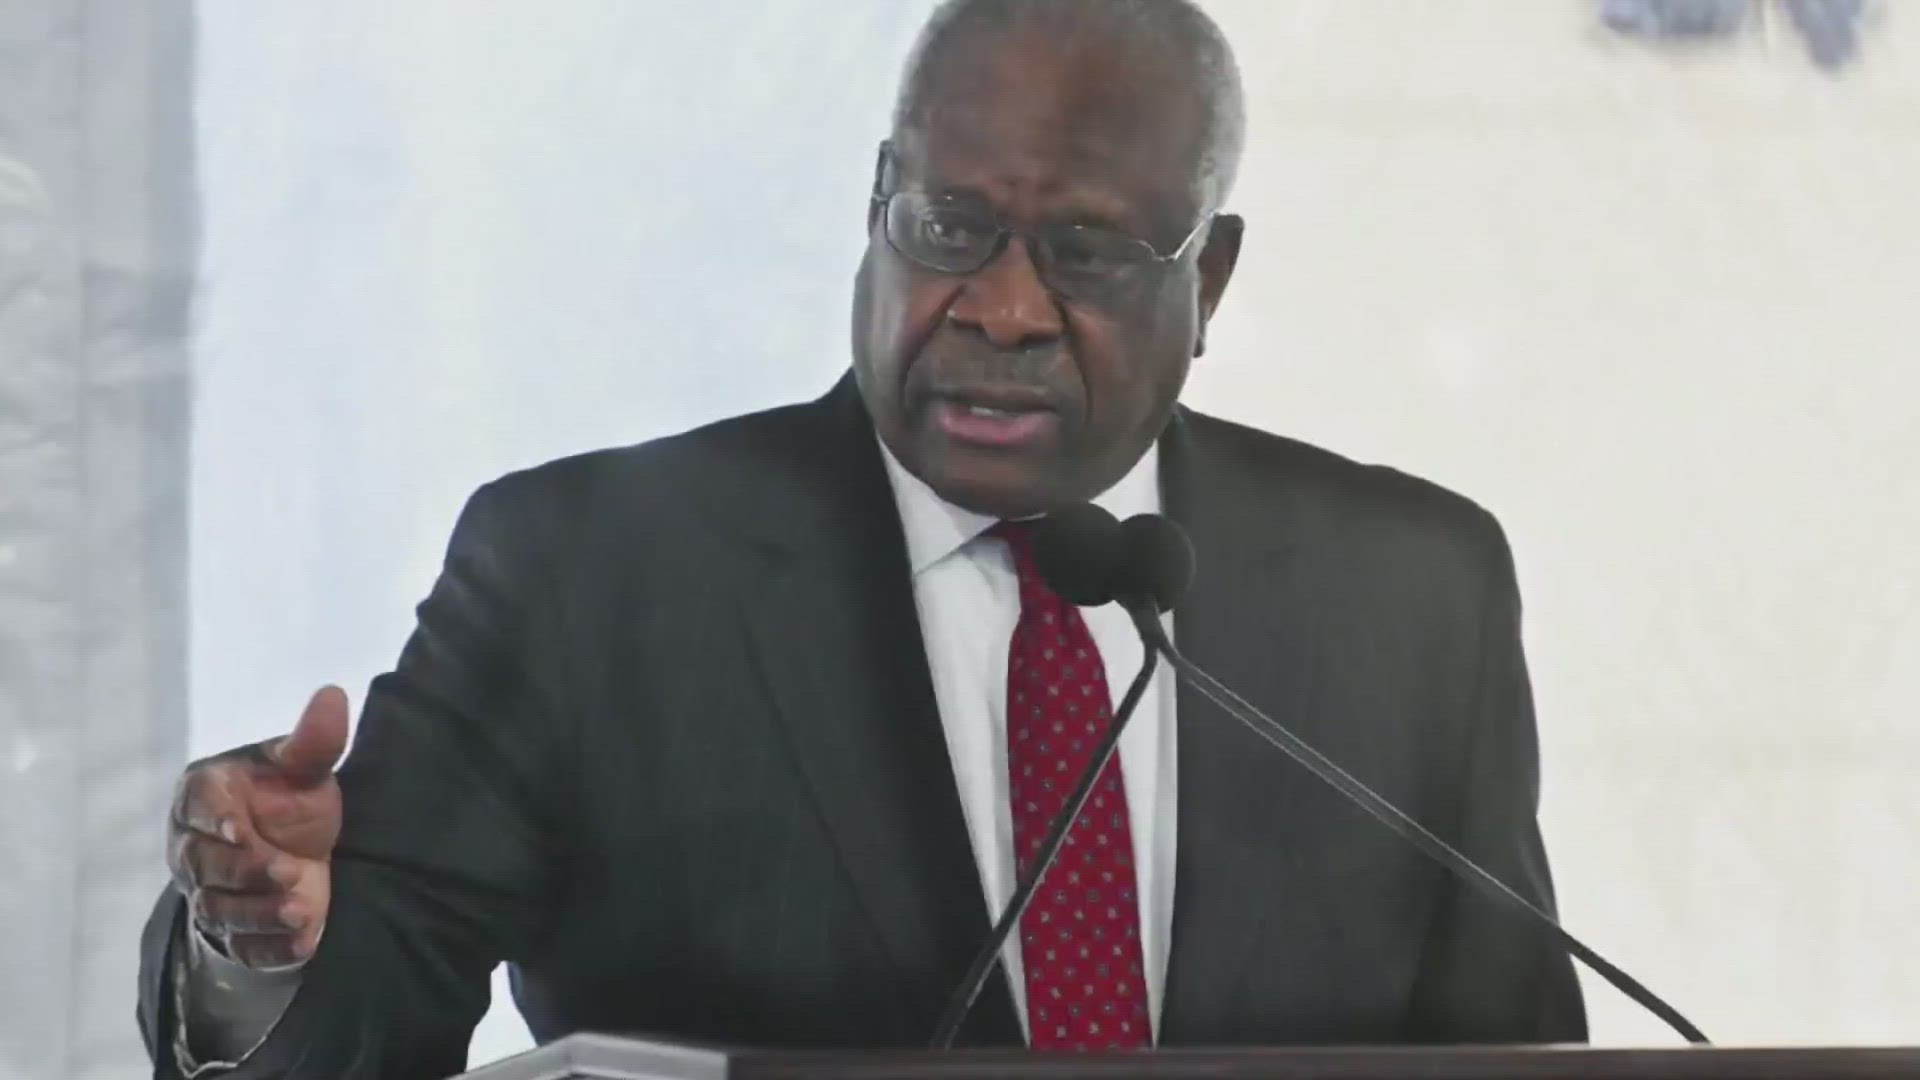 Supreme Court Justice Clarence Thomas and his wife have reportedly accepted several luxury trips, paid for by Harlan Crow - a prominent Republican donor.